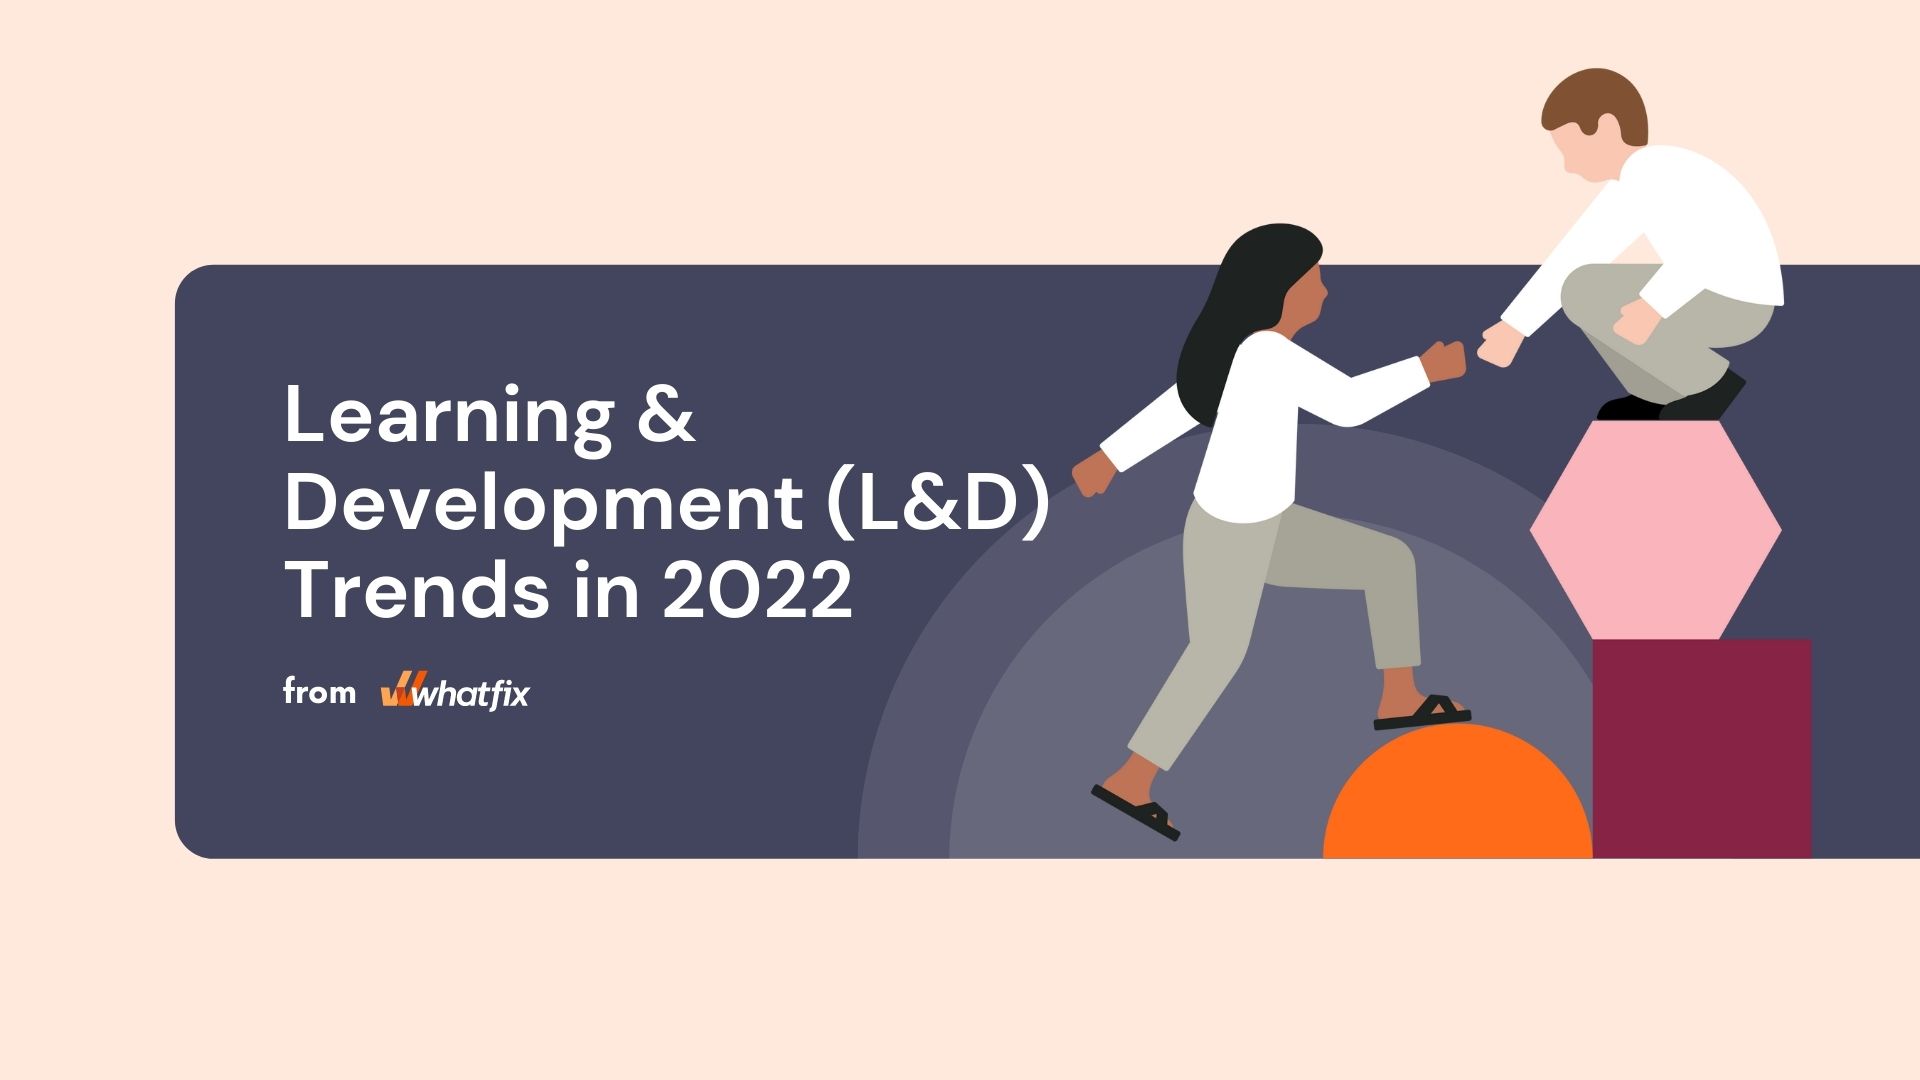 8 Learning & Development (L&D) Trends to Watch in 2023